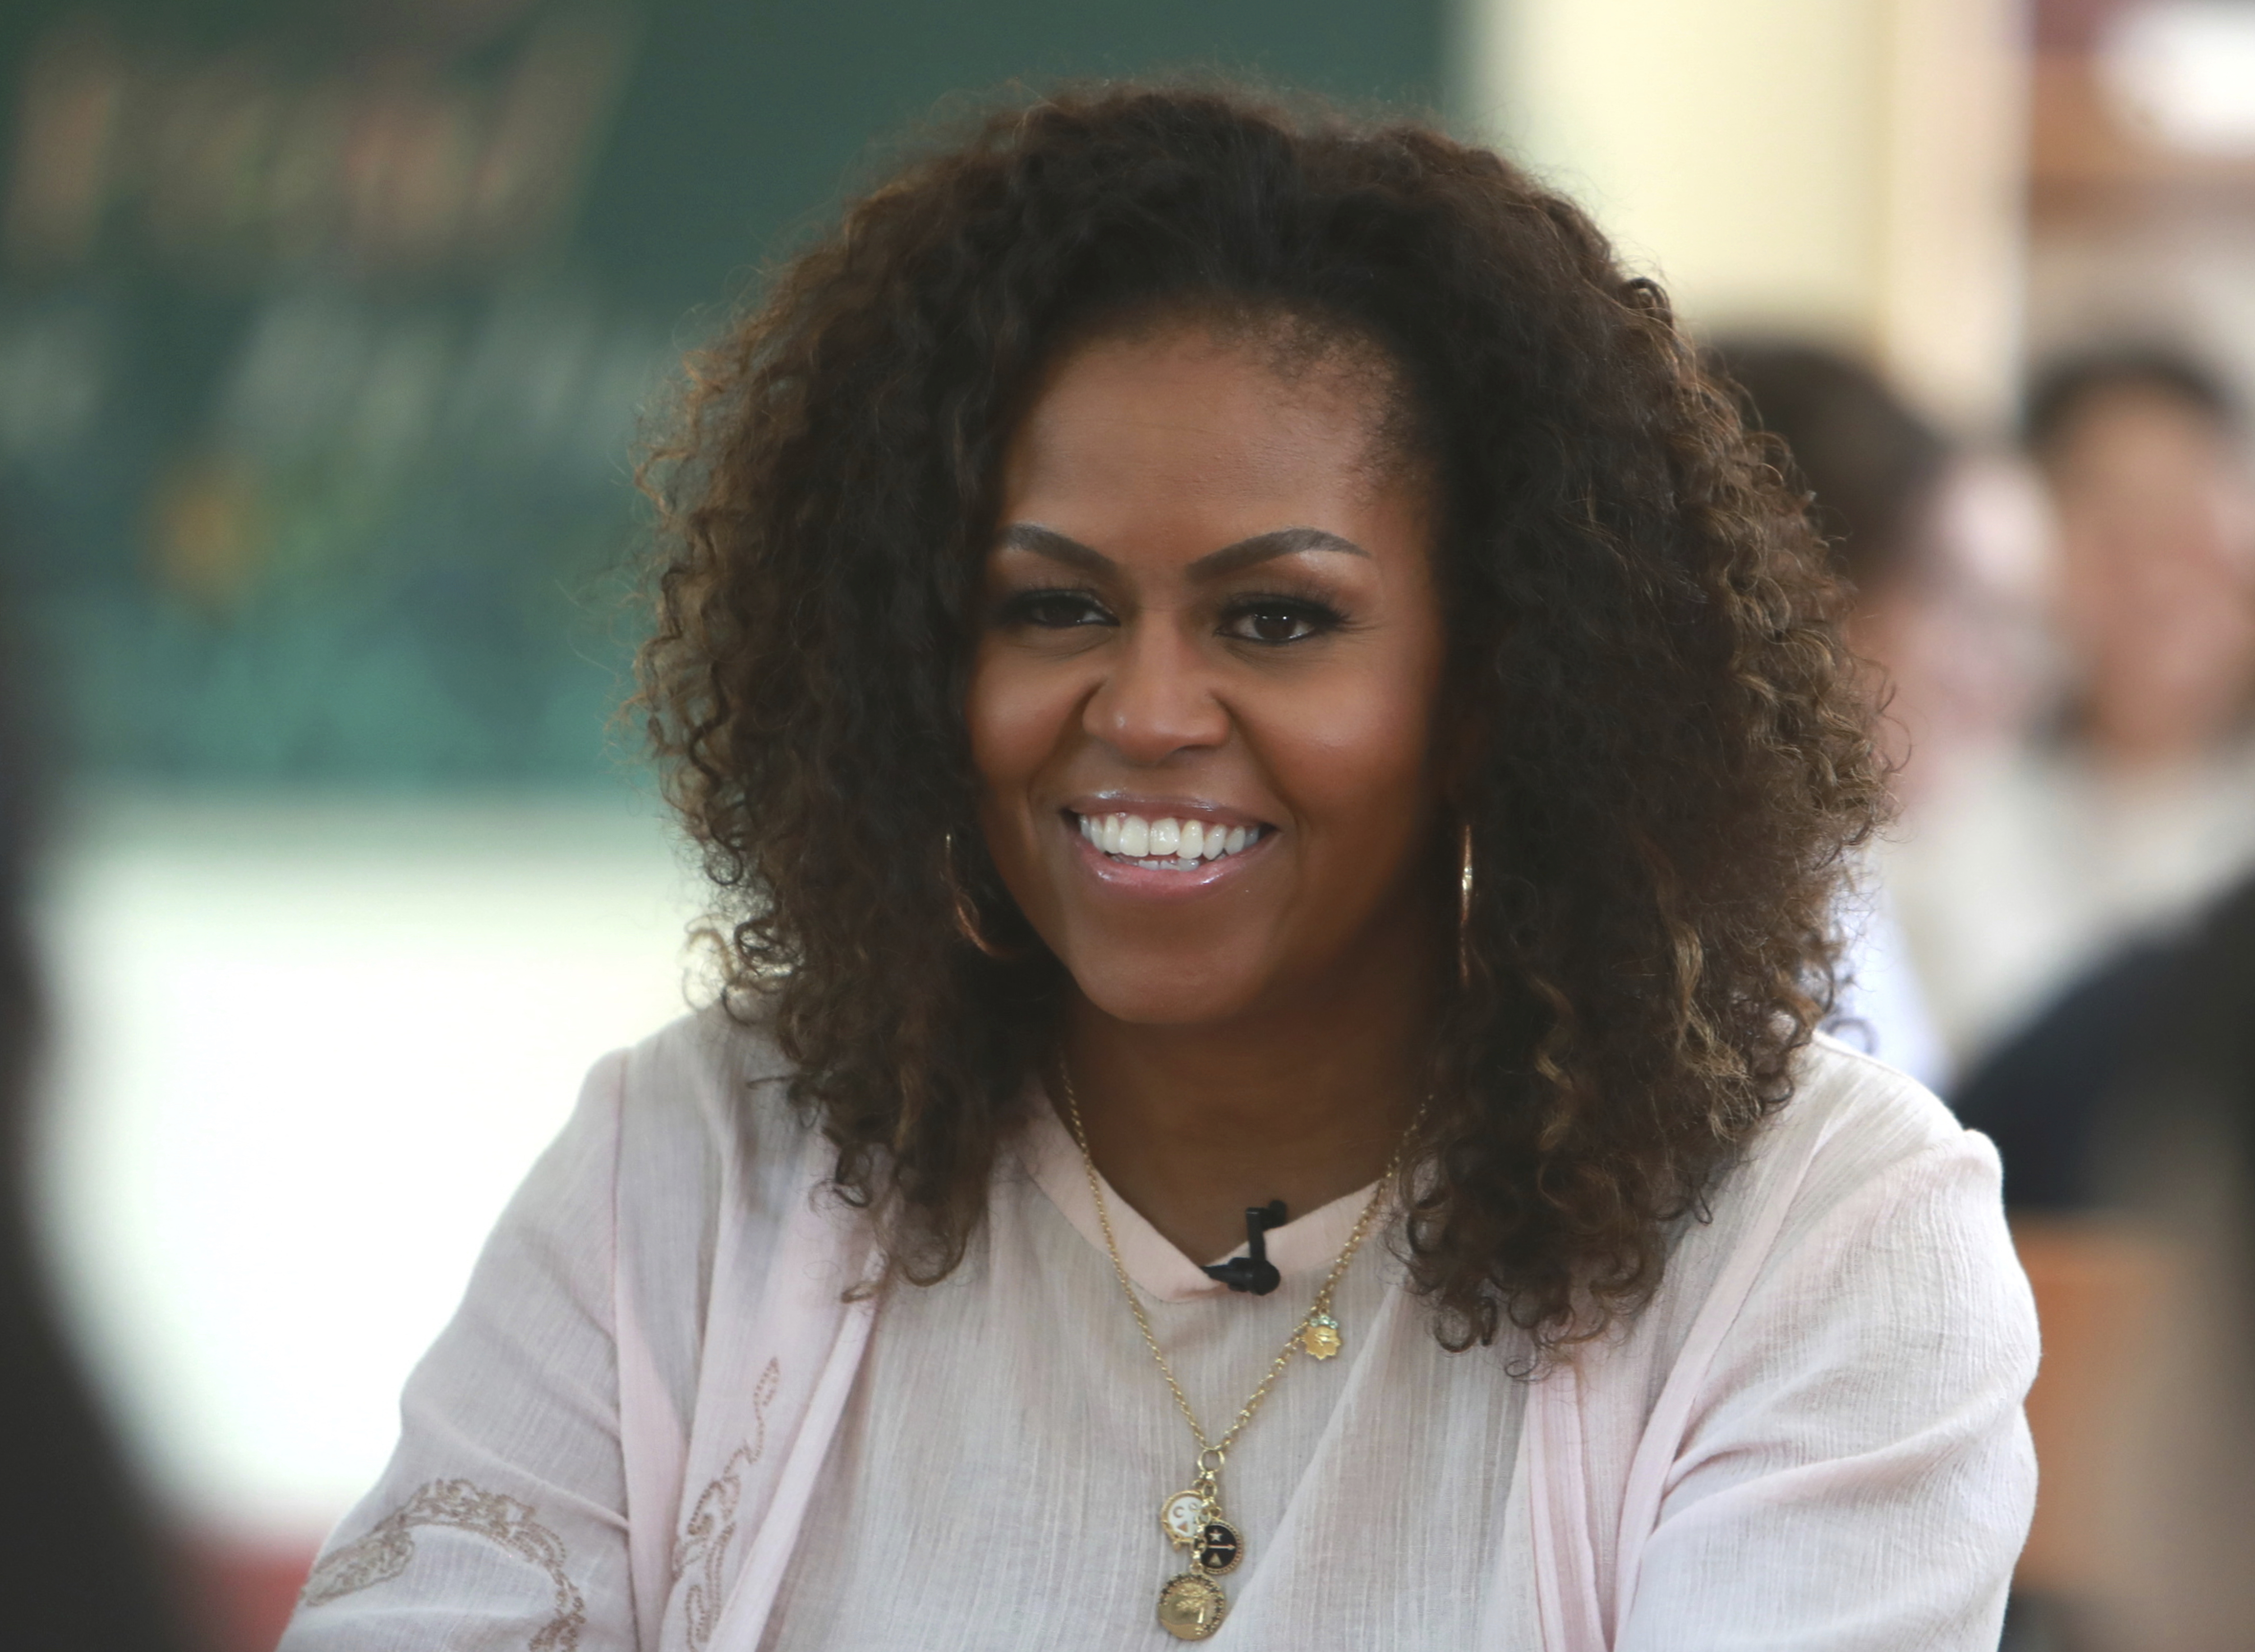 Michelle Obama Doc ‘Becoming’ to Premiere on Netflix